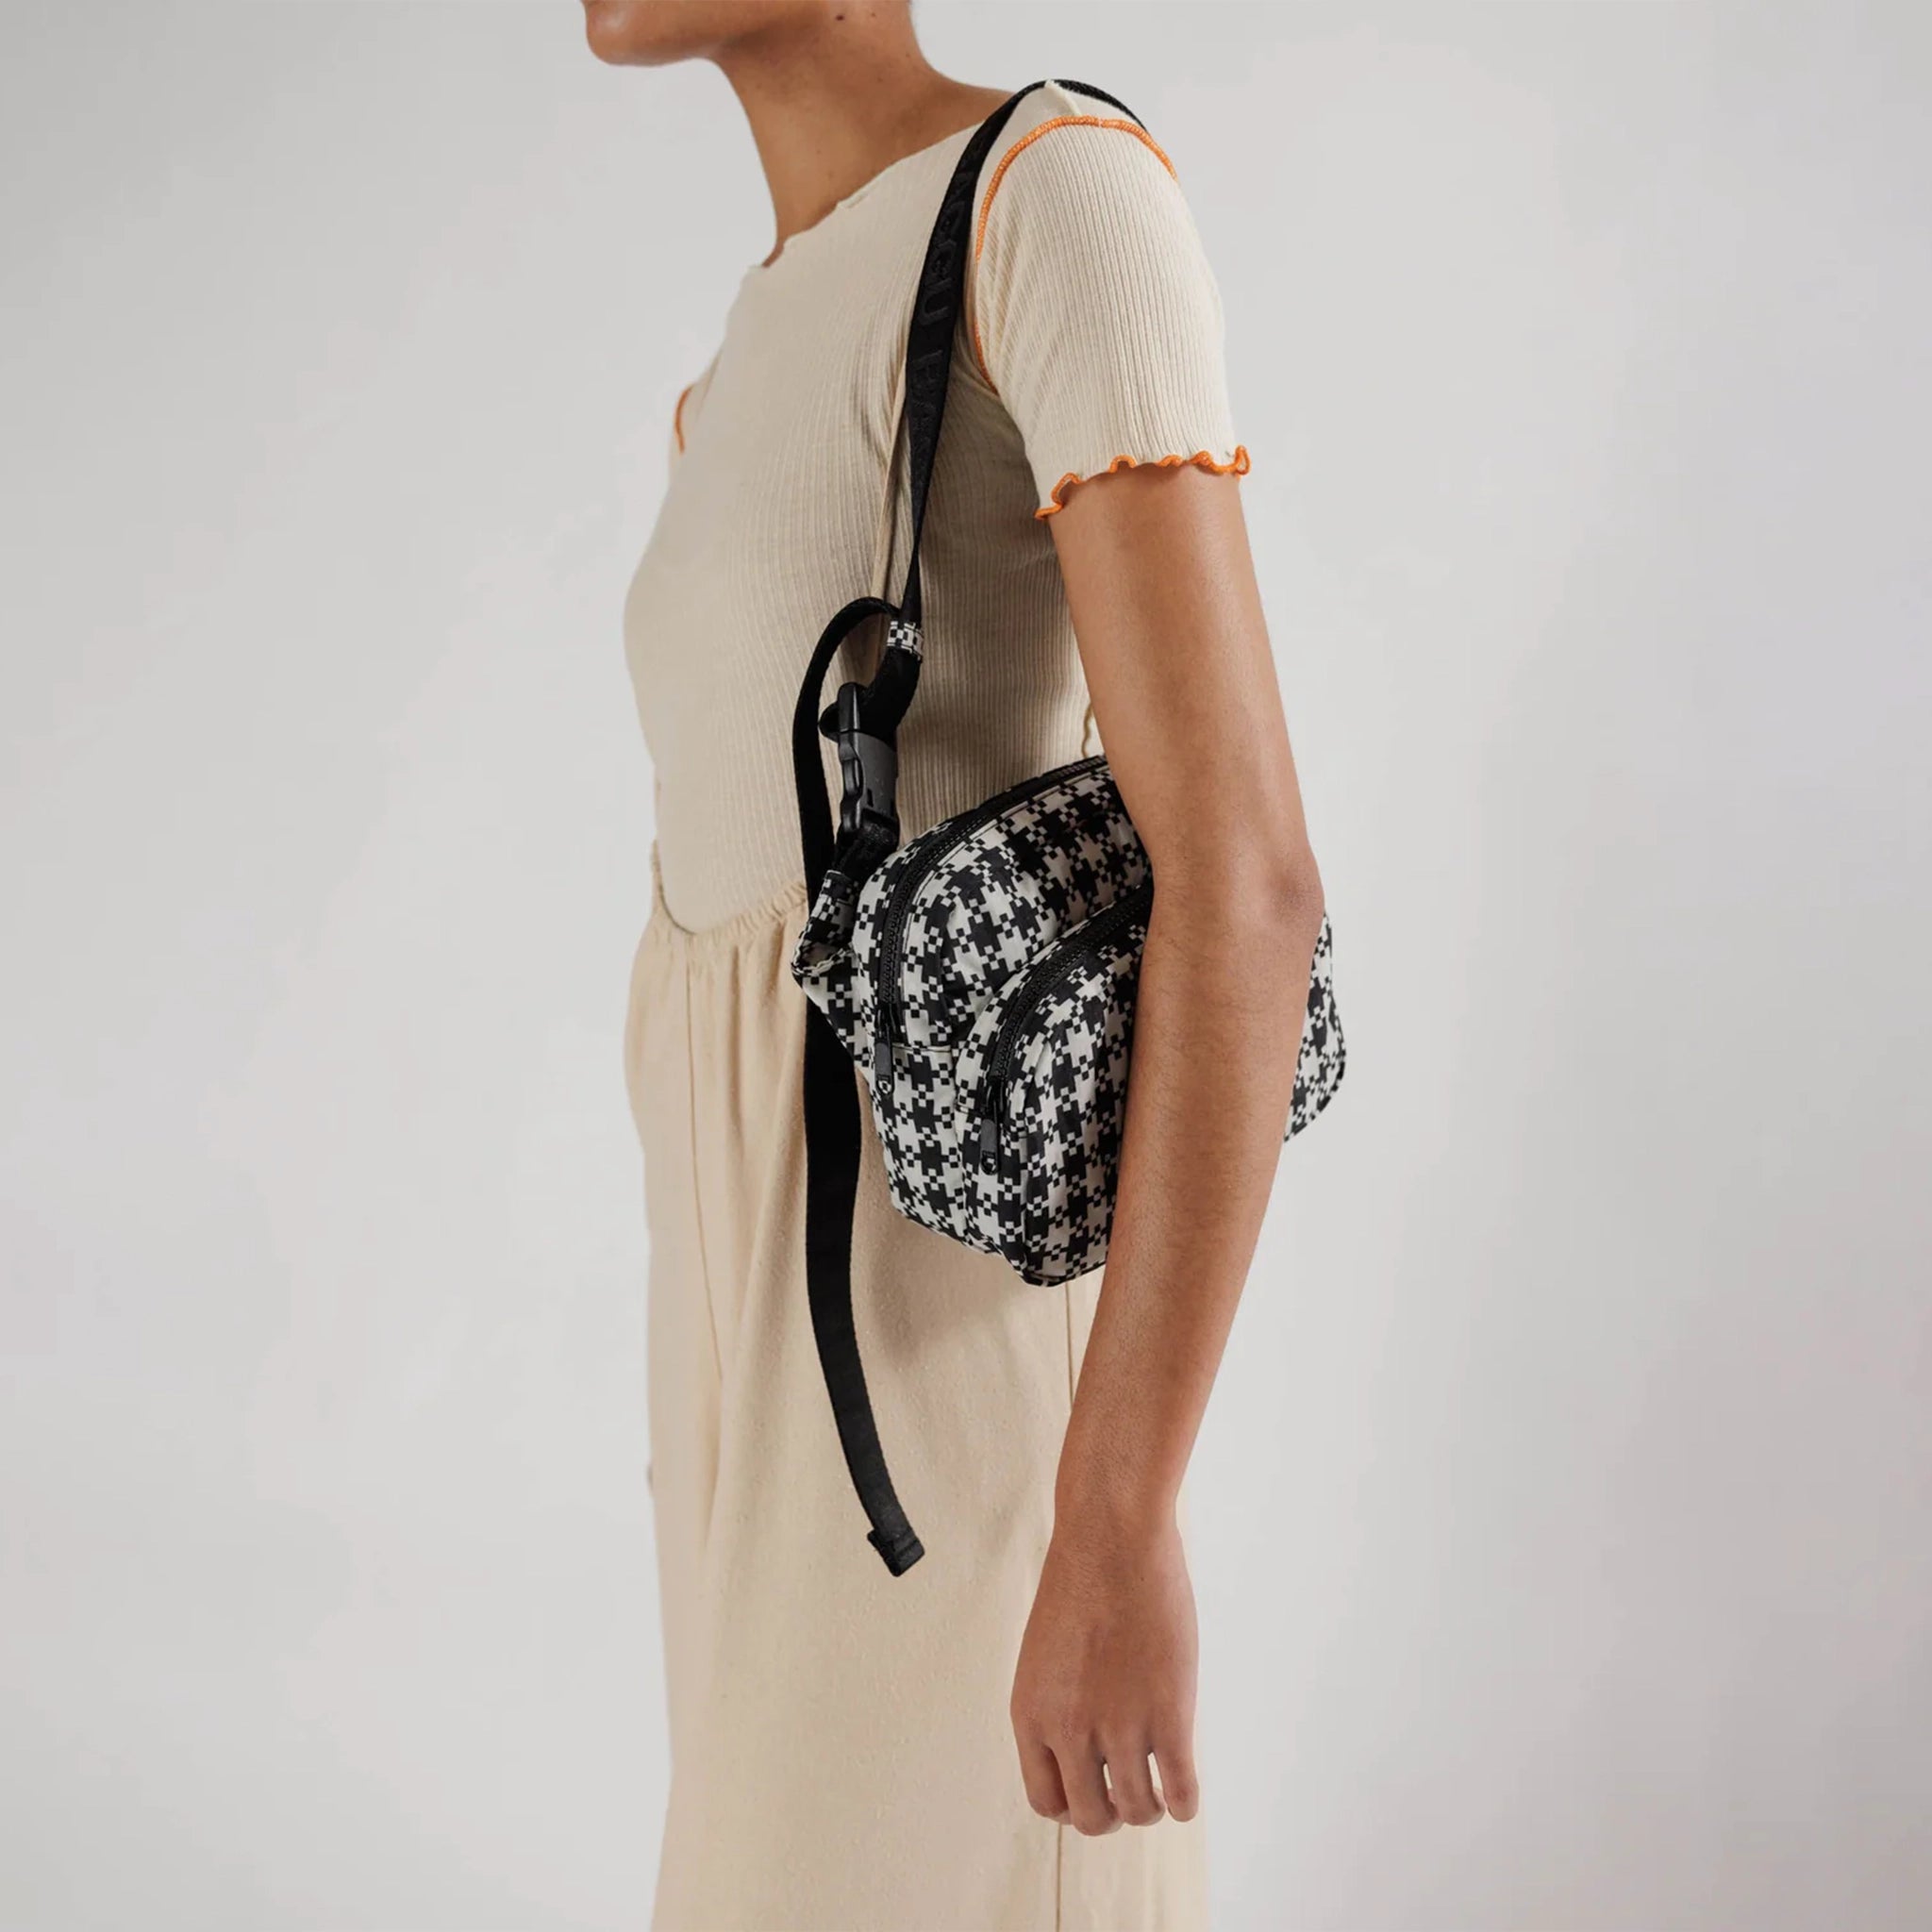 A black and white gingham nylon fanny pack with two zipper pockets and a black adjustable strap modeled over someones shoulder and chest.